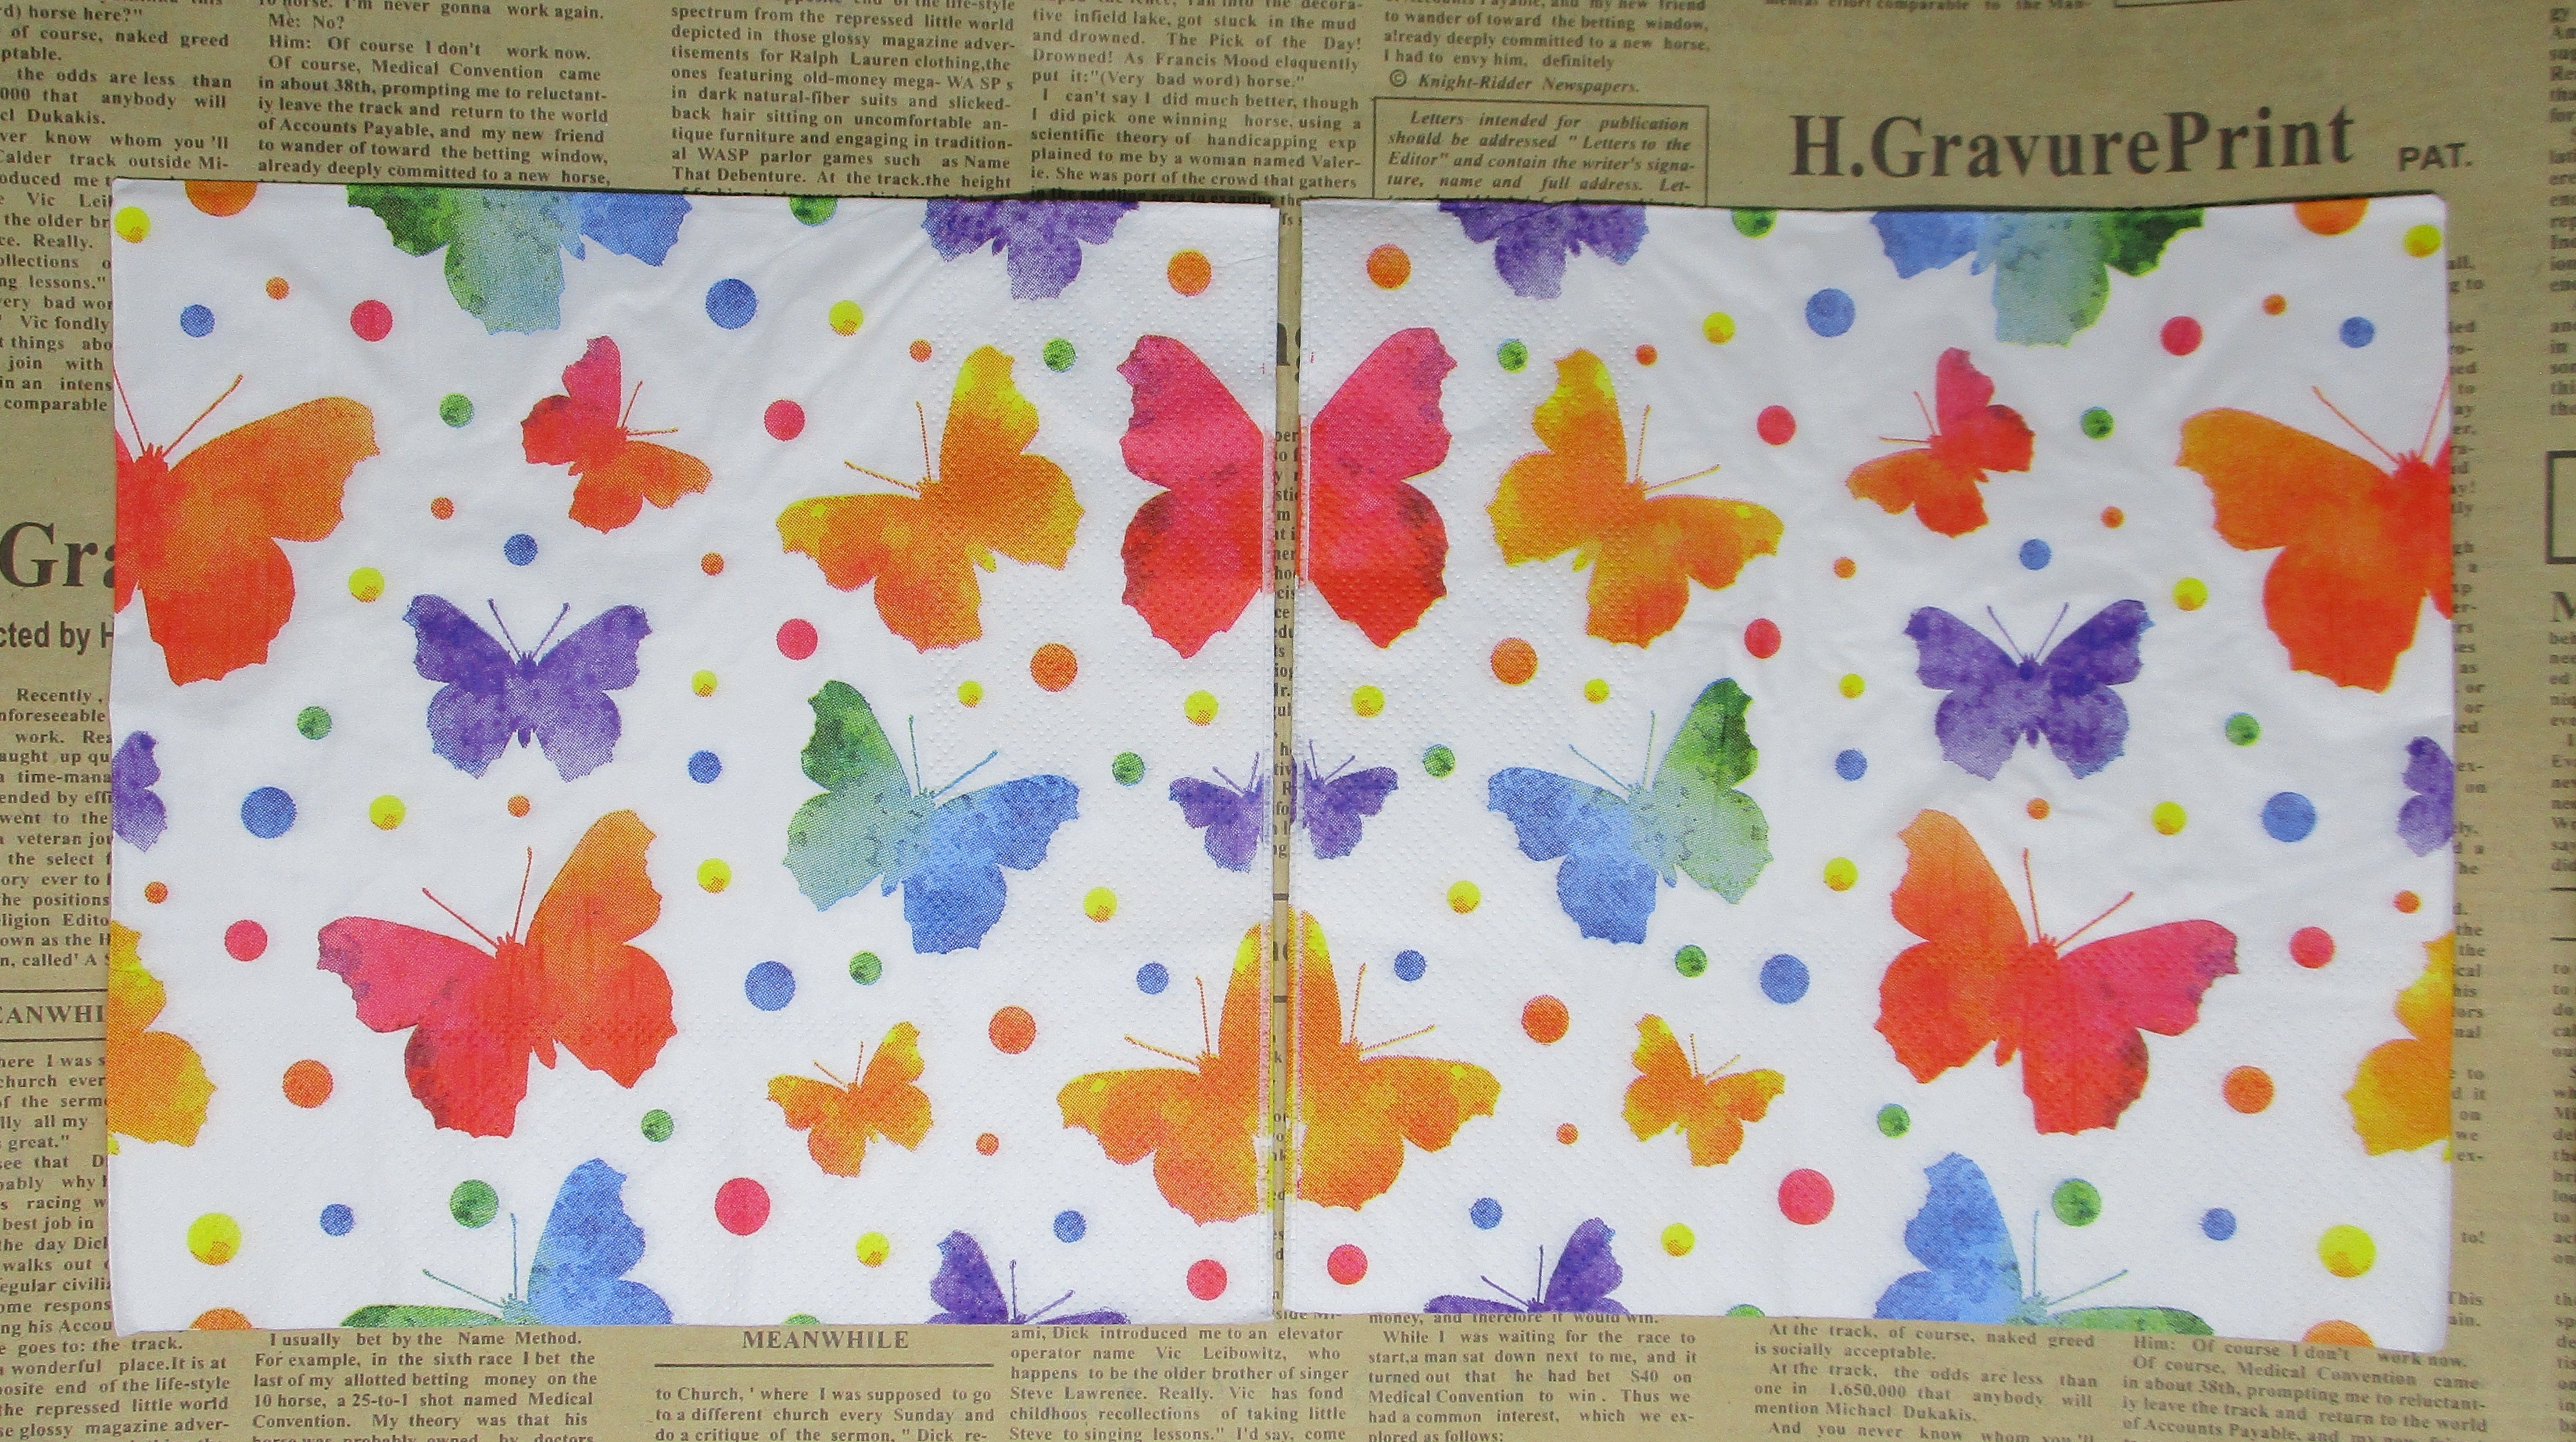 Butterfly Cutouts, 108 Pack Paper Butterflies, Colorful Butterfly Cutout